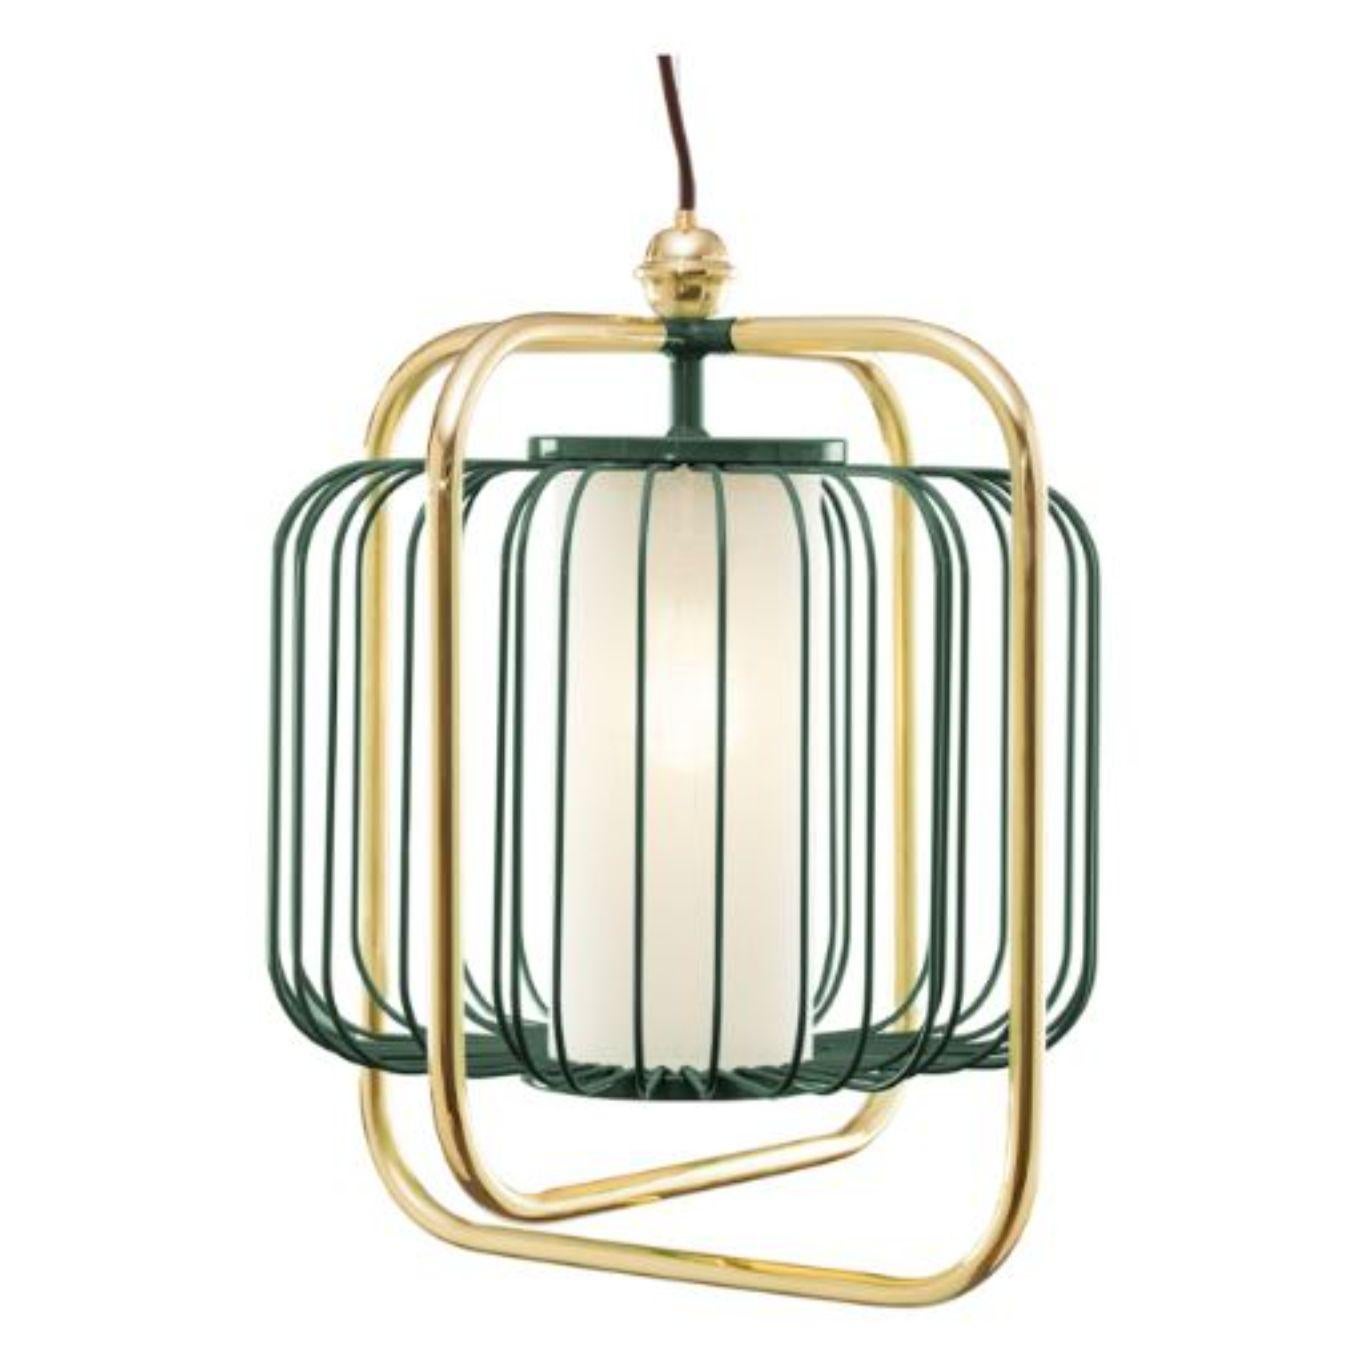 Brass and Lipstick Jules III Suspension Lamp by Dooq For Sale 2